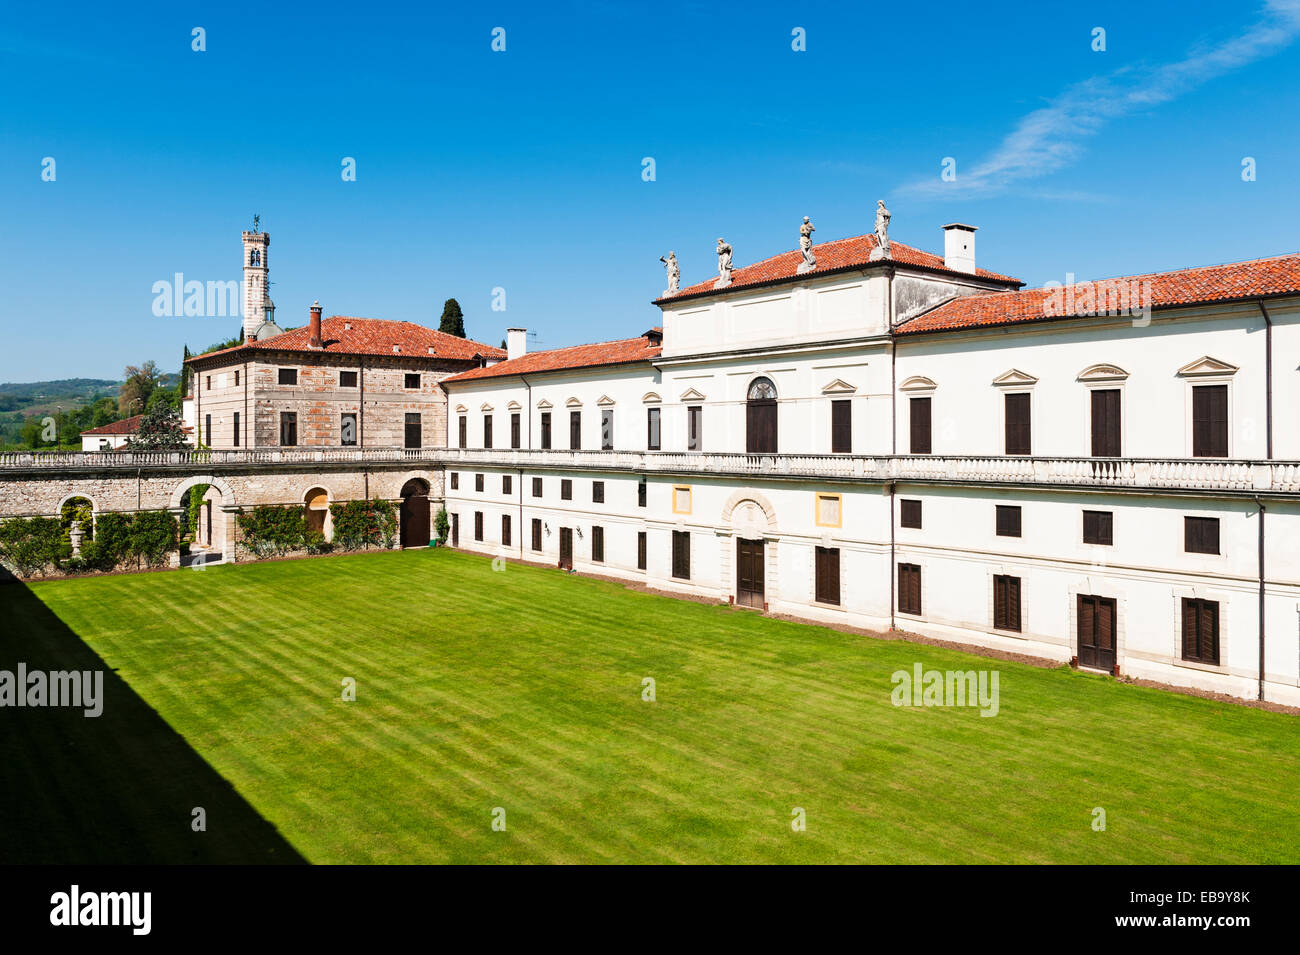 Villa Trissino Marzotto, Vicenza, Italy. The walled garden and the 18c wing - the original 15c building is in the background Stock Photo